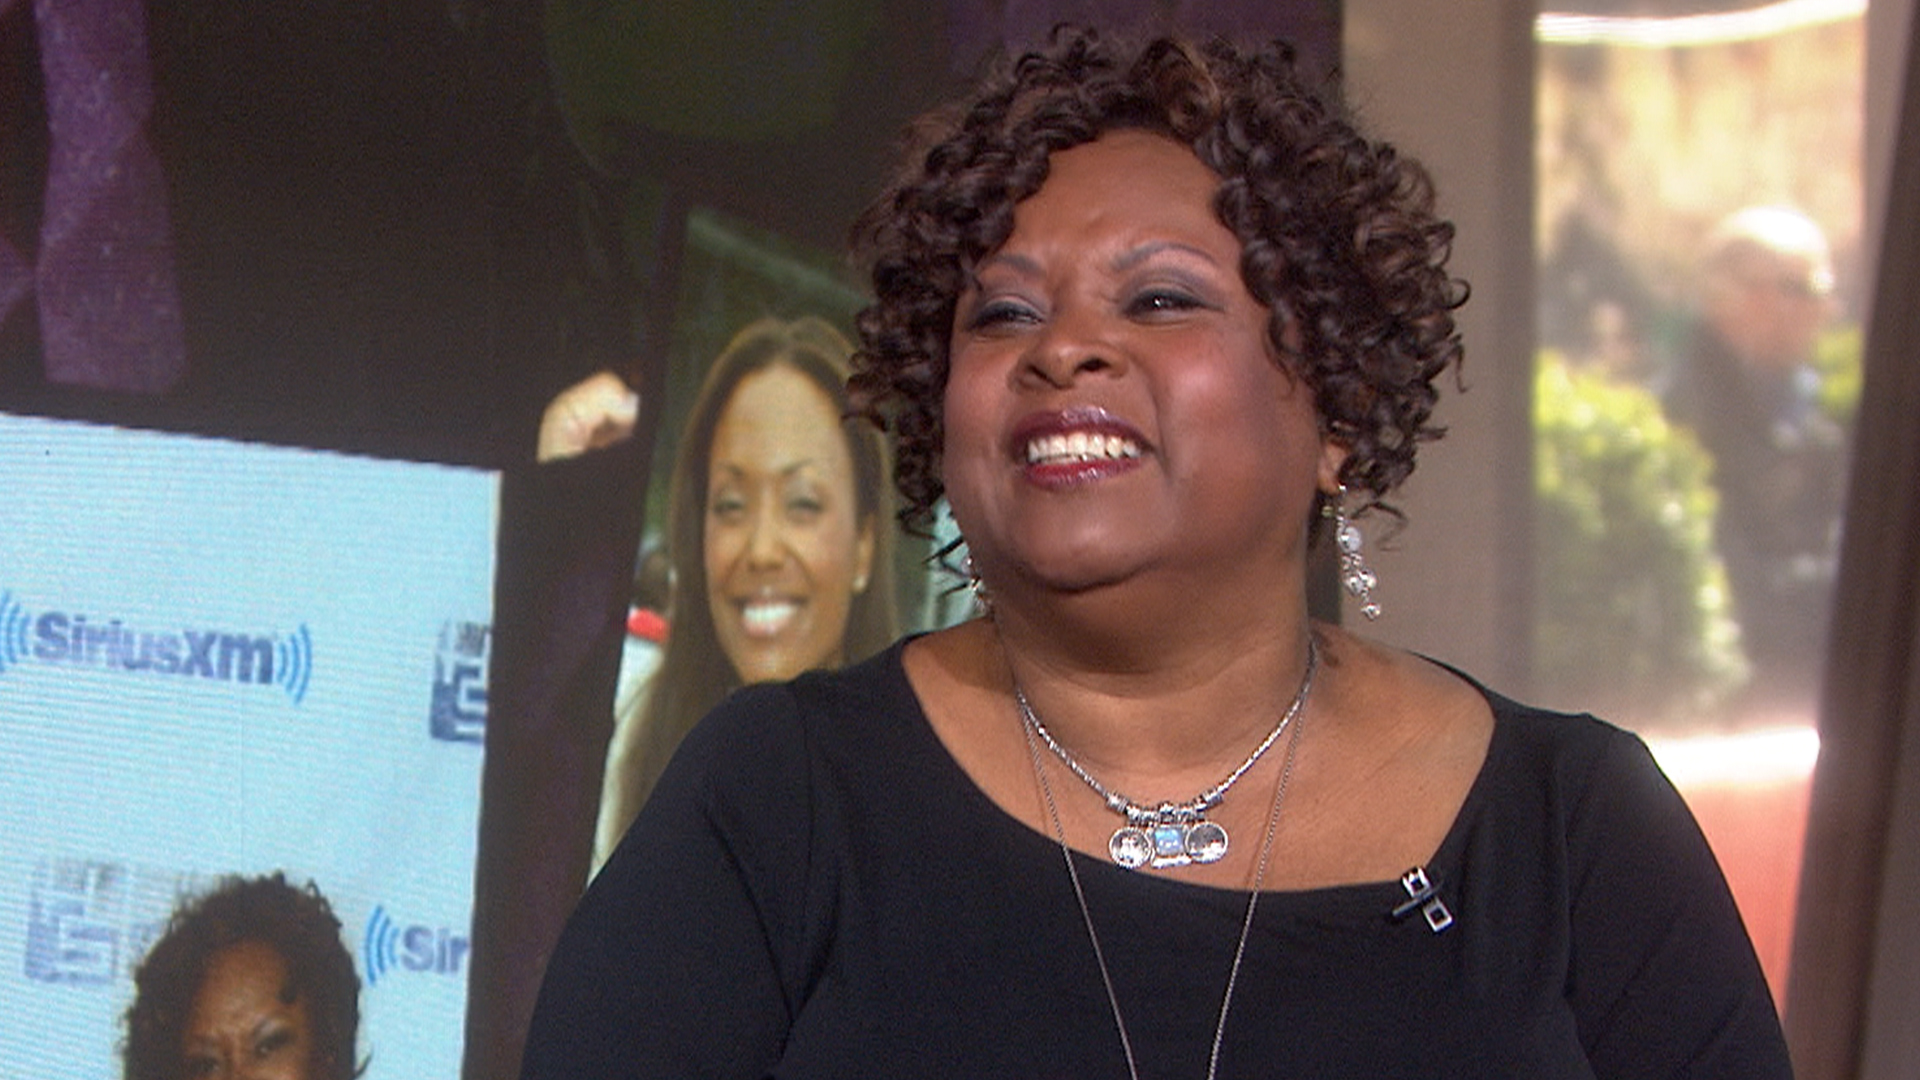 Robin Quivers, the woman who has held her own alongside Howard Stern for 30...